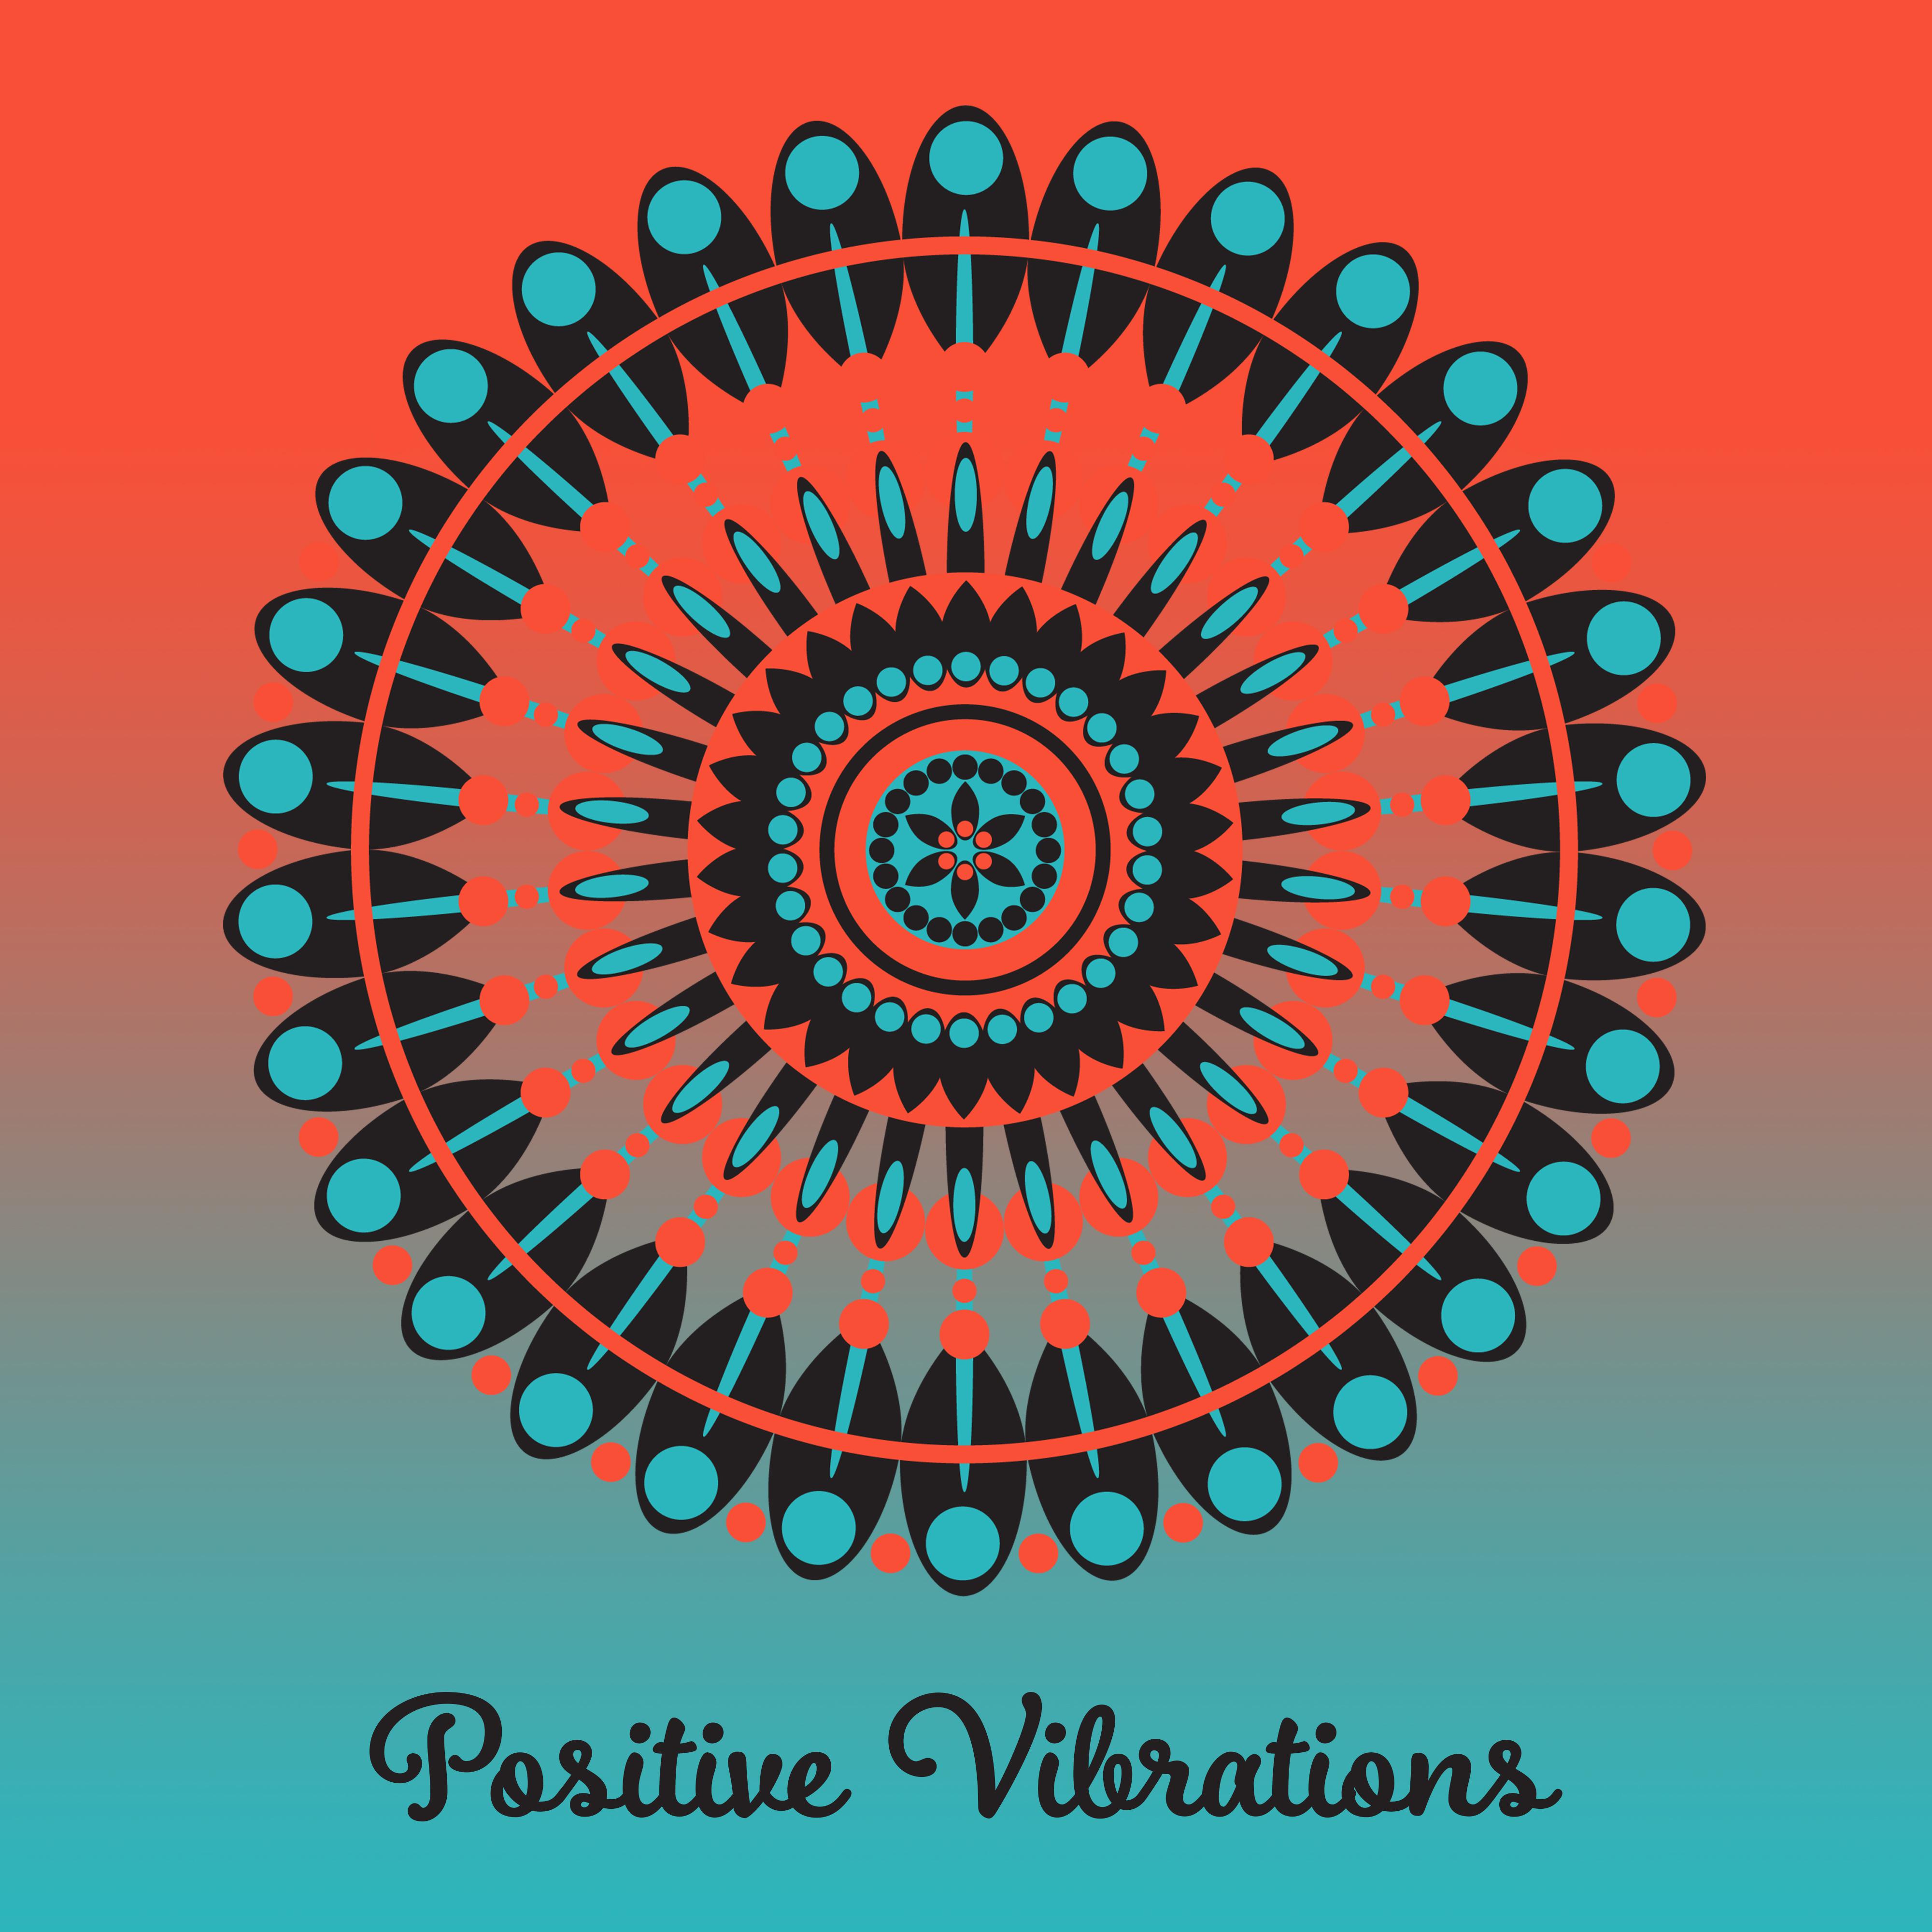 Positive Vibrations – New Age 2017, Relaxing Music, Sounds of Nature, Zen, Bliss, Healing Natural Melodies